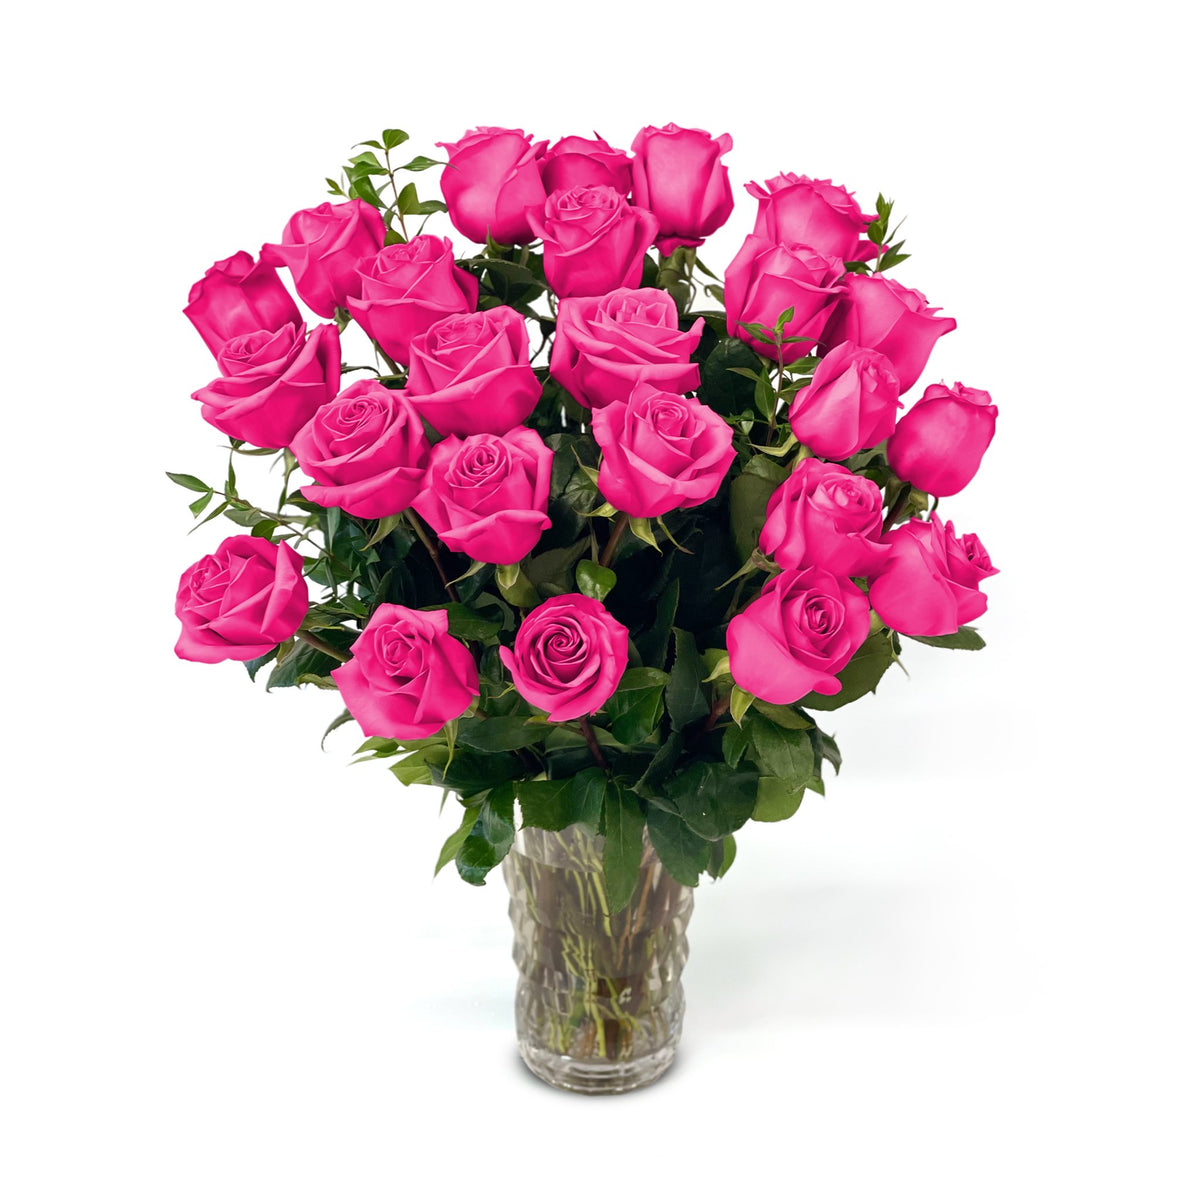 NYC Flower Delivery - Fresh Roses in a Crystal Vase | Hot Pink - 2 Dozen - Roses